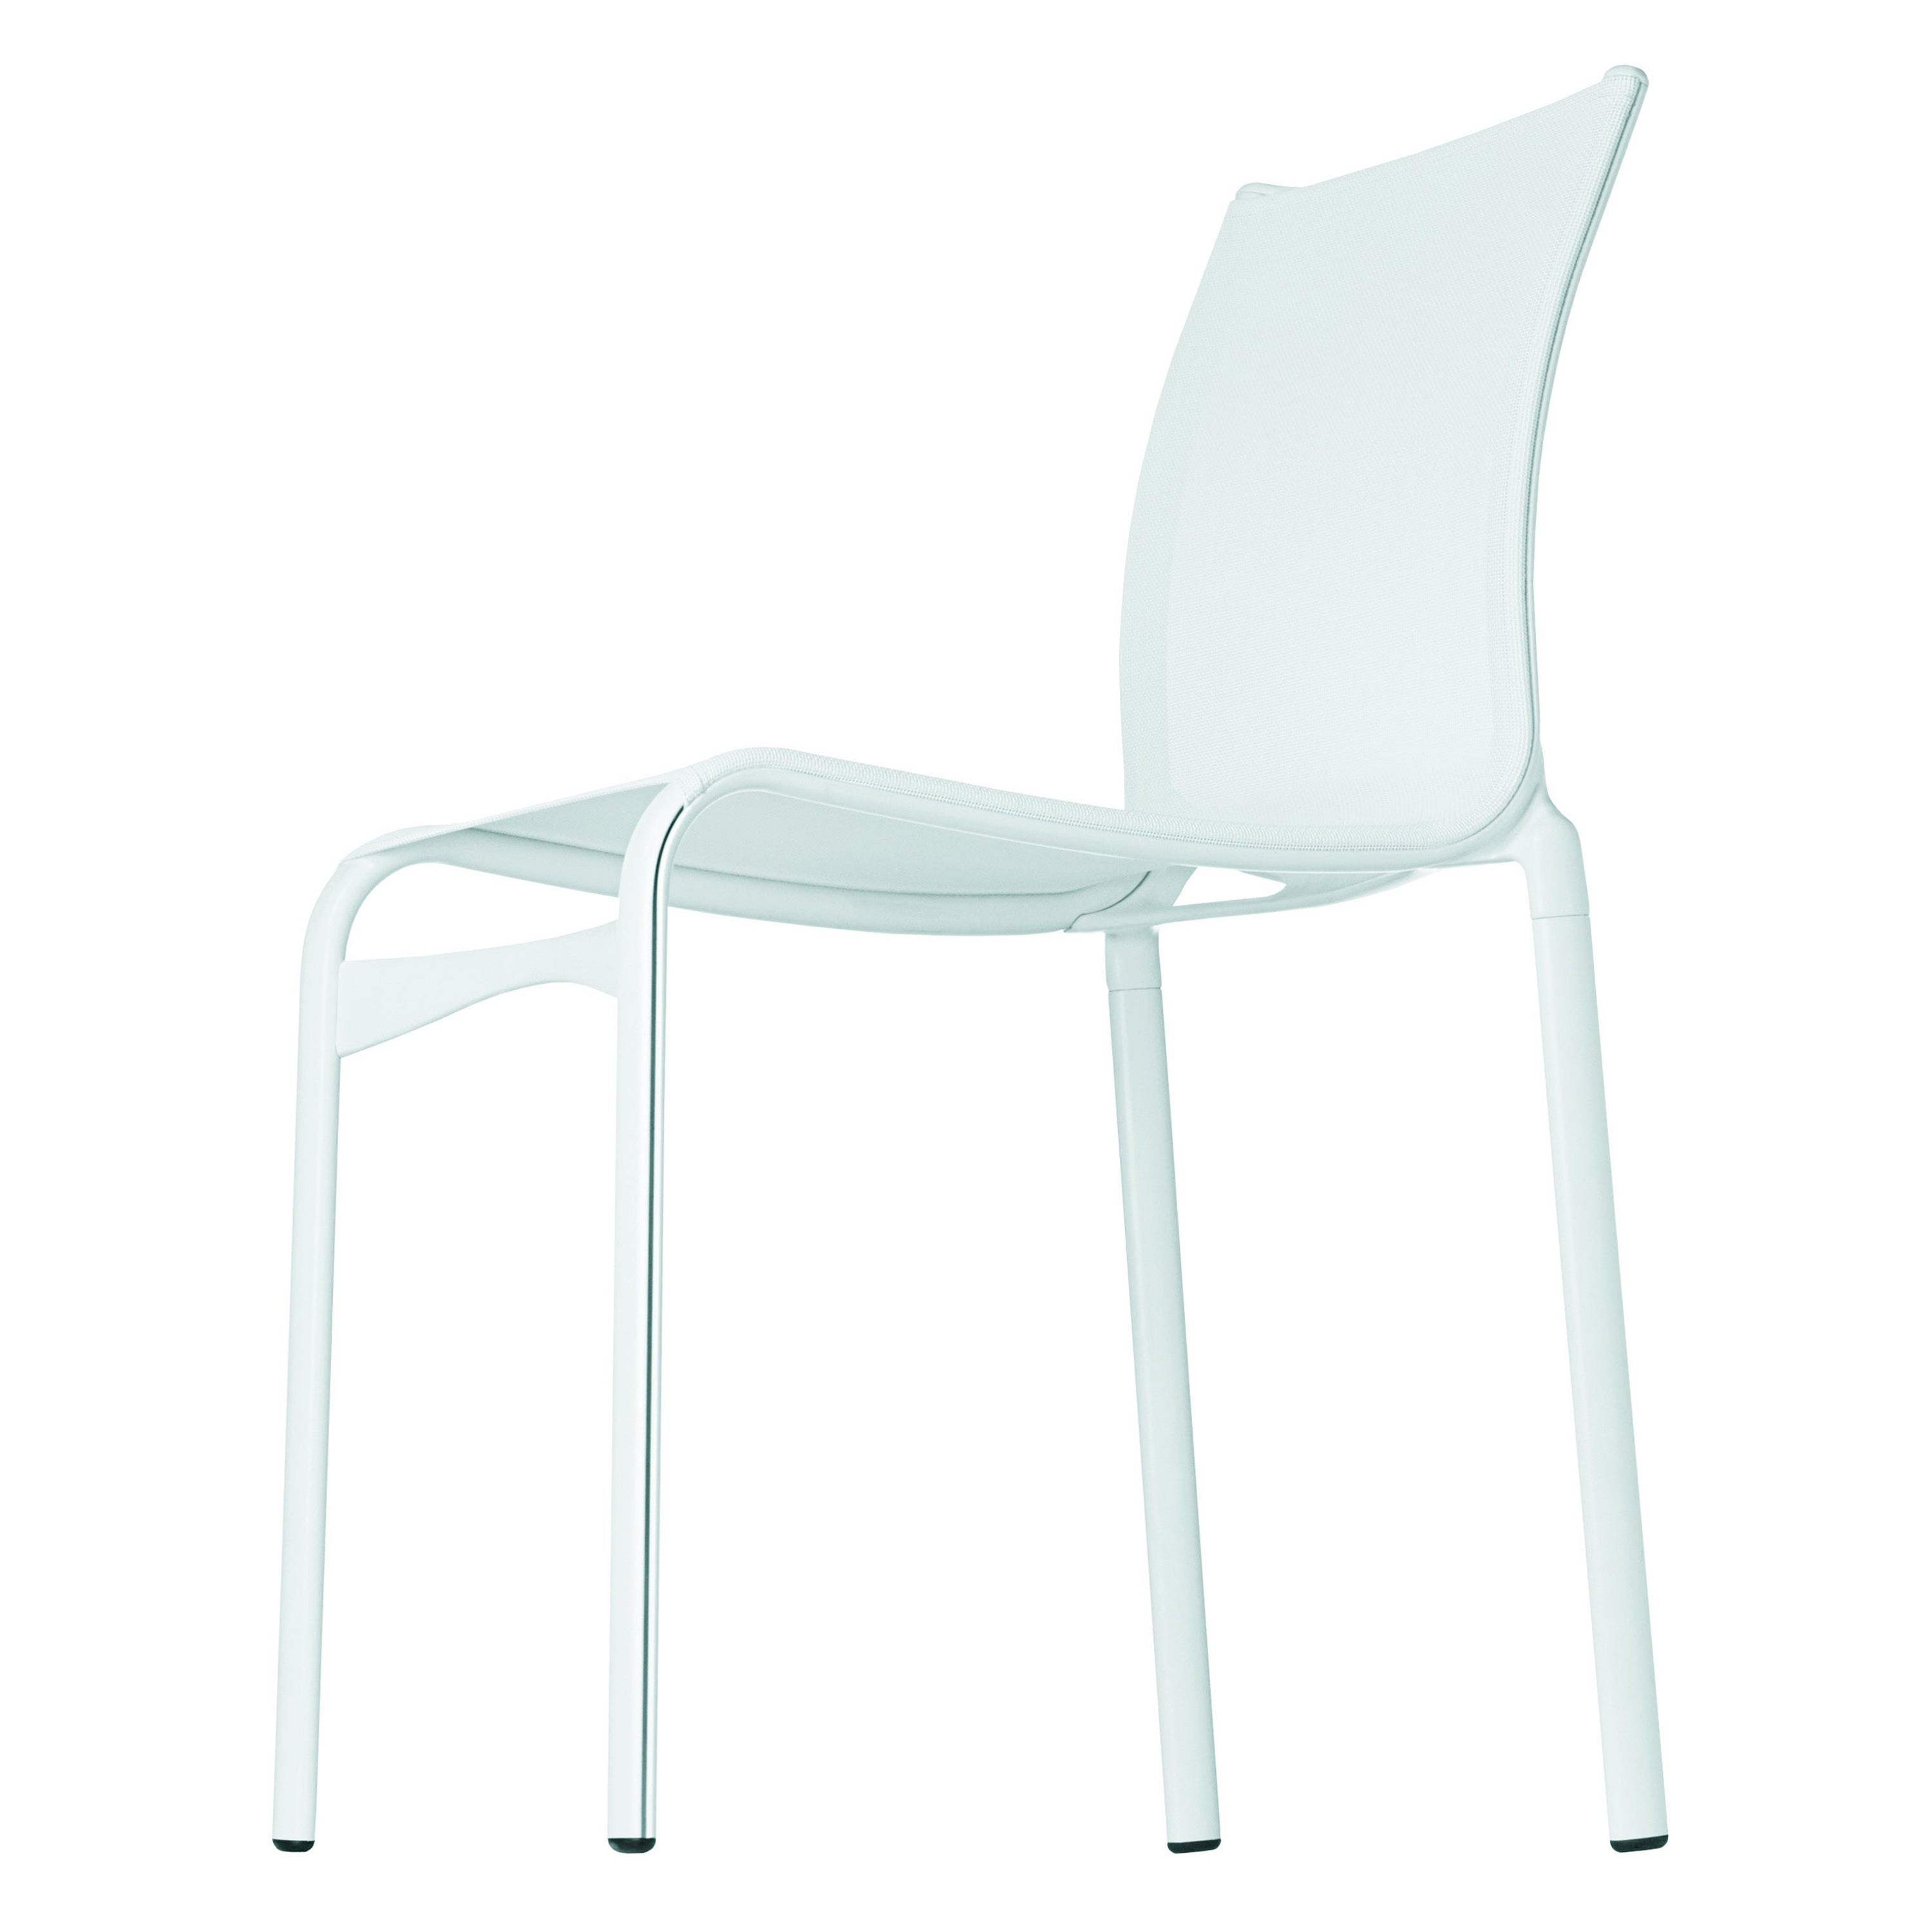 Alias Highframe 40 Outdoor Chair in White Mesh with Lacquered Aluminium Frame